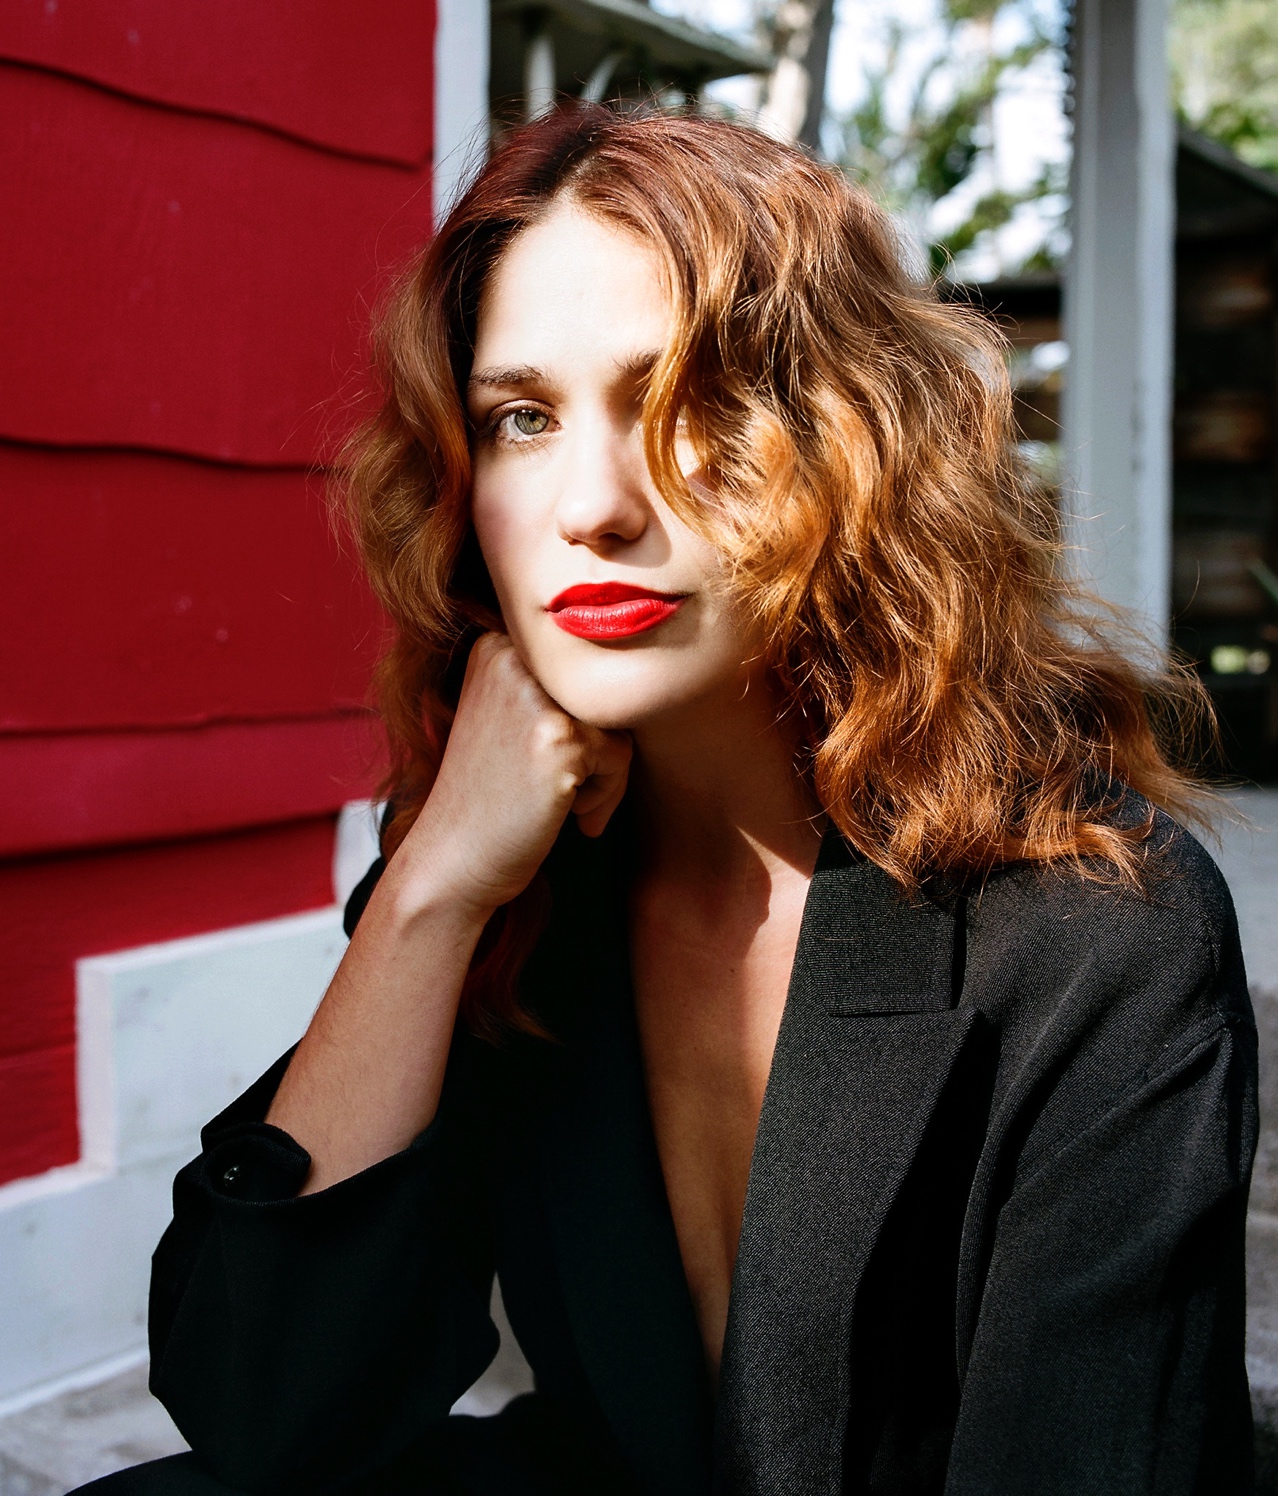 Premiere: Lola Kirke Shares Two New Songs for Valentine’s Day